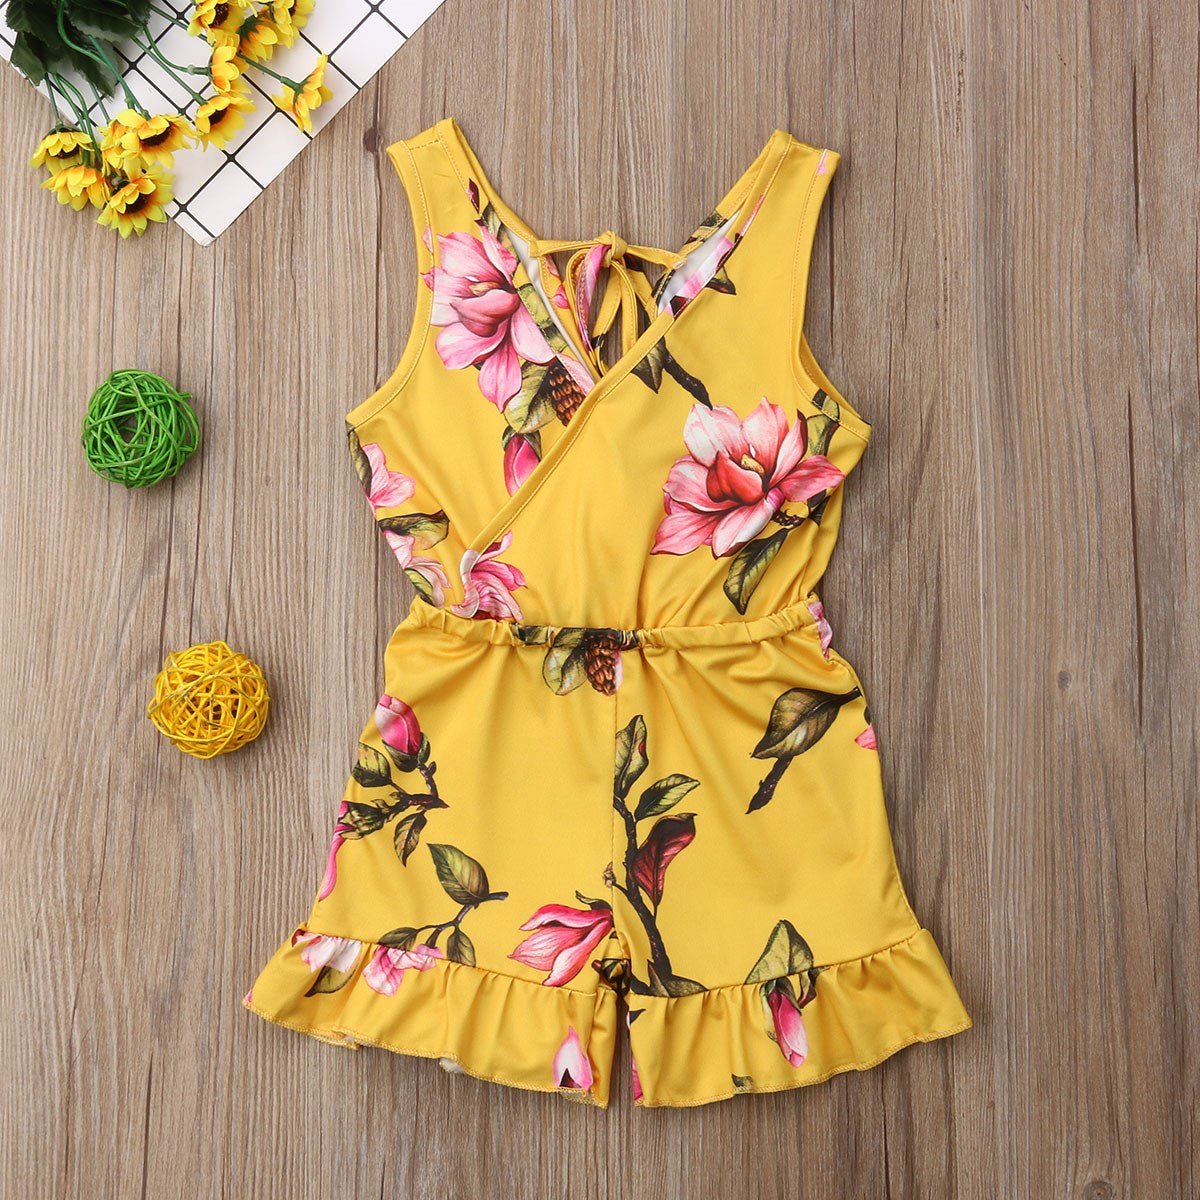 Summer Girls baby girl Floral Outfits Clothes - GIGI & POPO